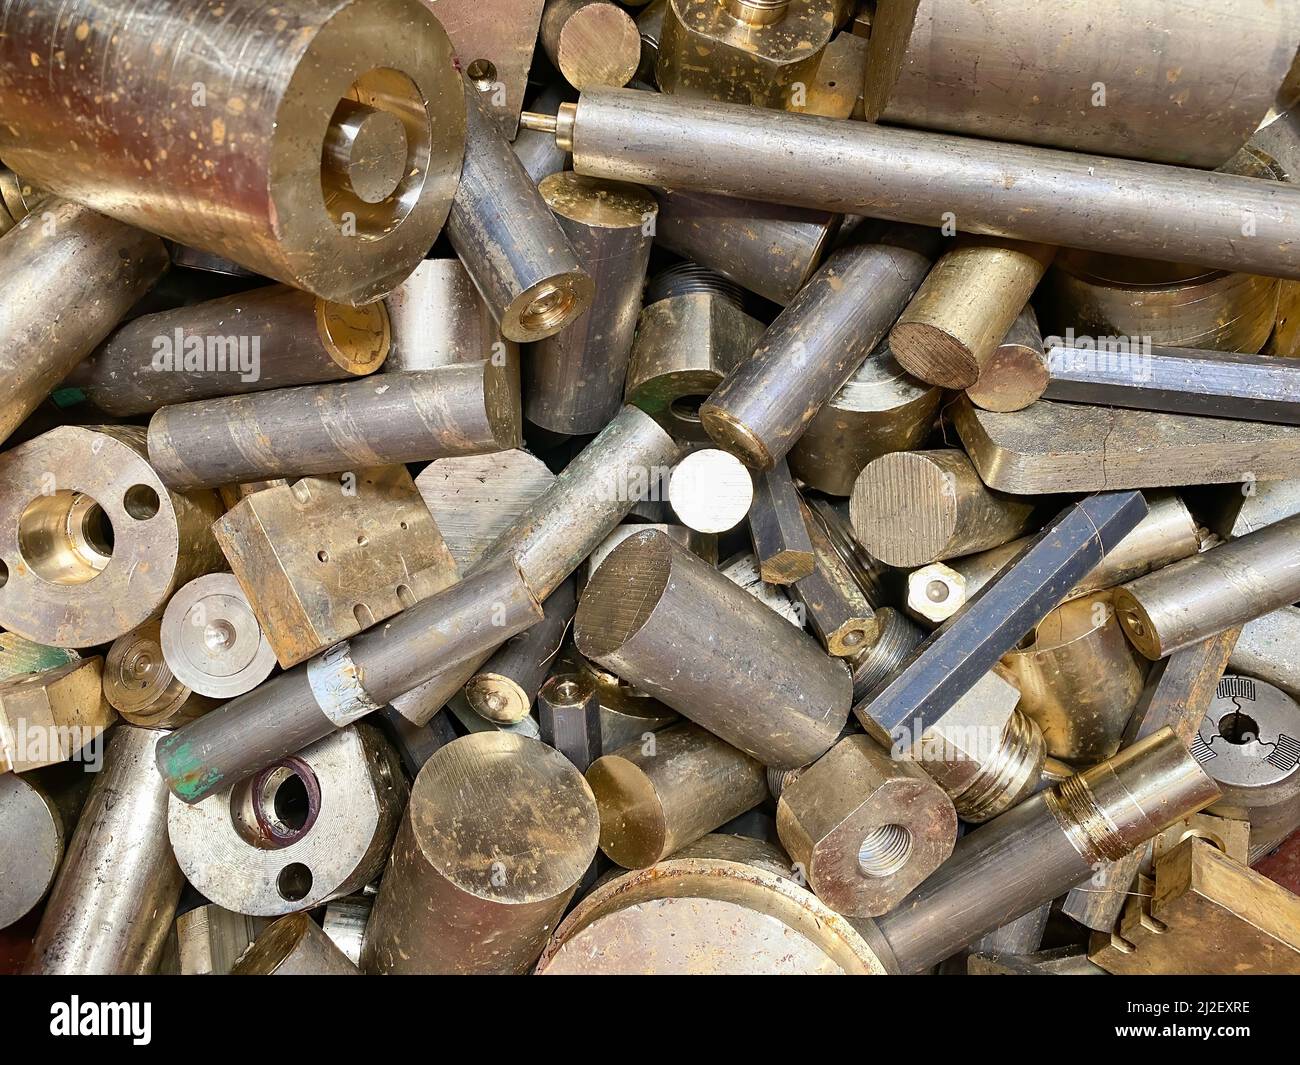 https://c8.alamy.com/comp/2J2EXRE/metal-products-in-the-factory-scrap-brass-rods-rejects-high-quality-photo-2J2EXRE.jpg